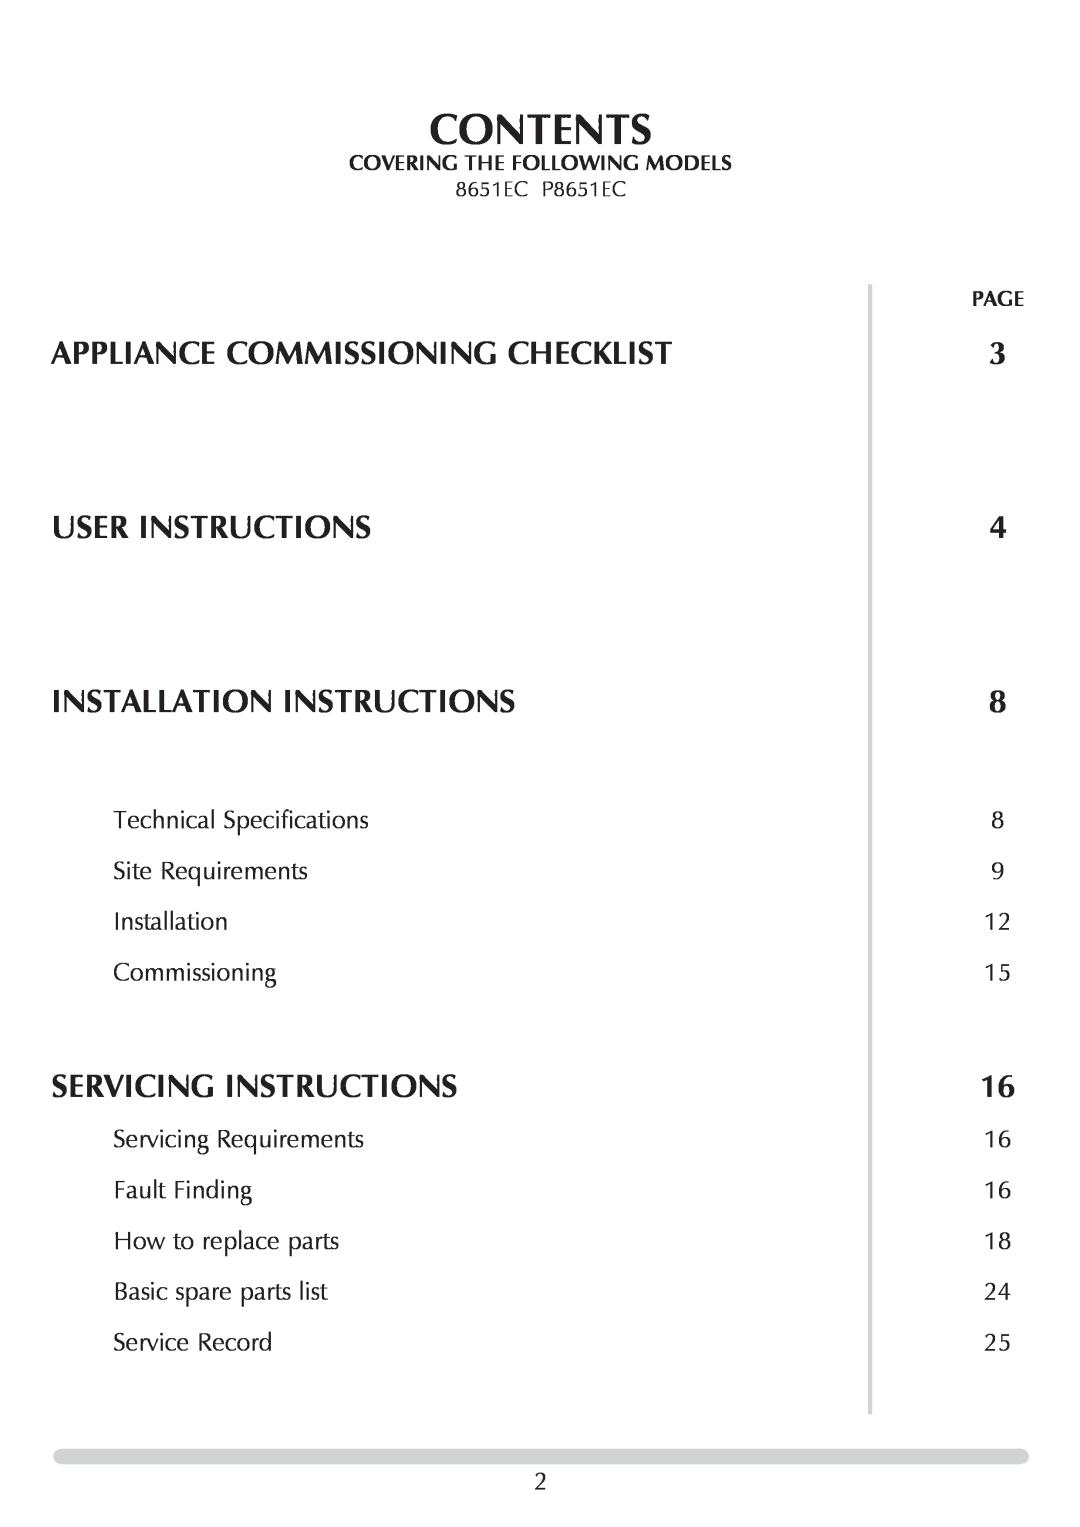 Stovax PR0731 manual Contents, Appliance commissioning checklist, user instructions instaLlation Instructions, 3 4 